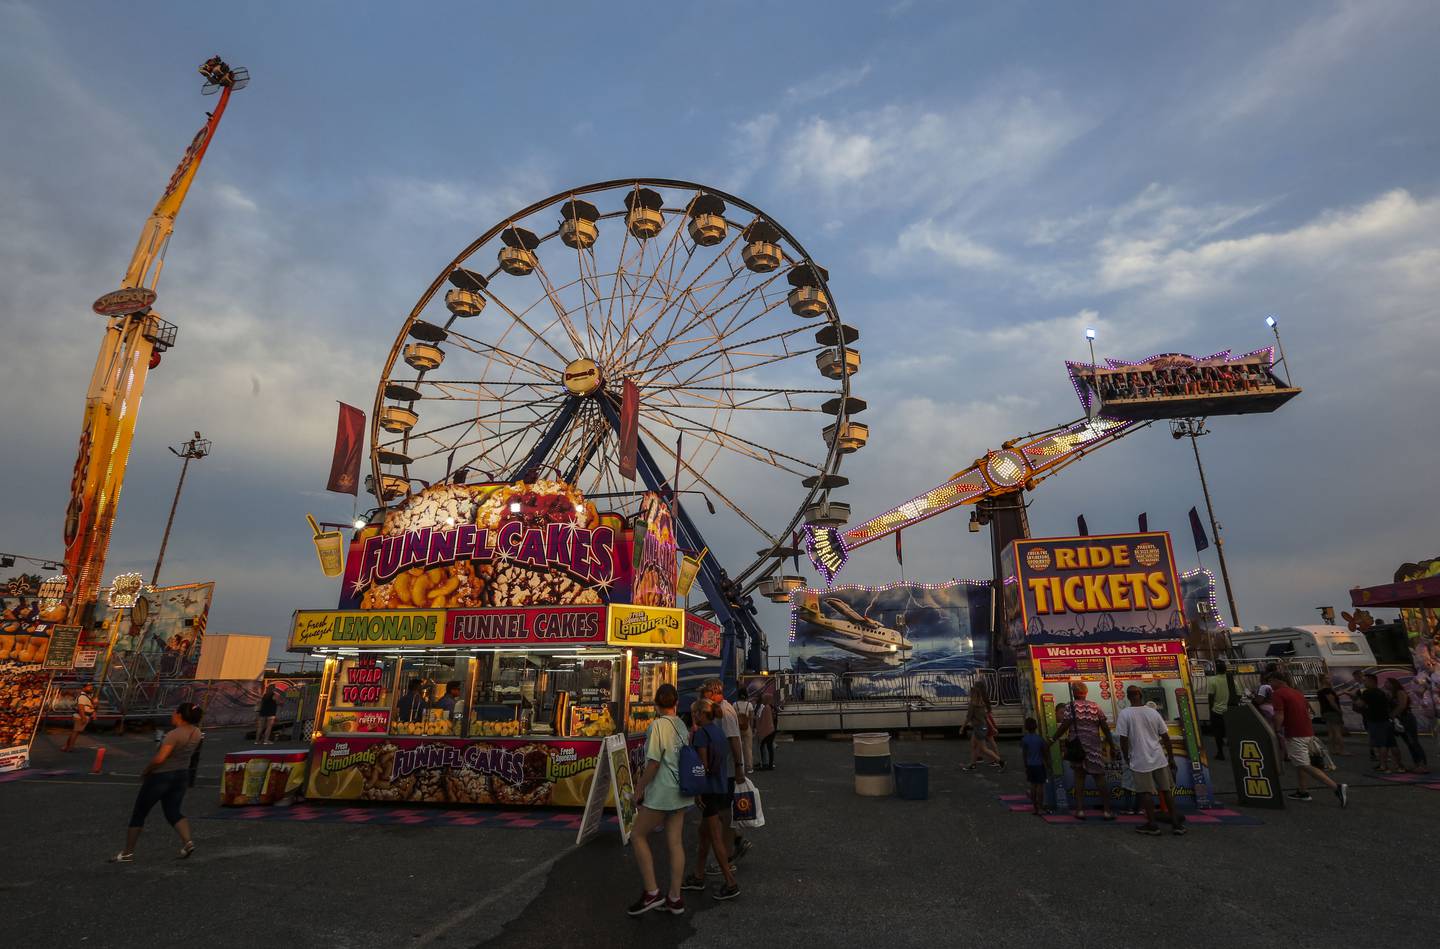 People enjoy themselves at the Maryland State Fair on opening night in Timonium, MD on August 25, 2022.